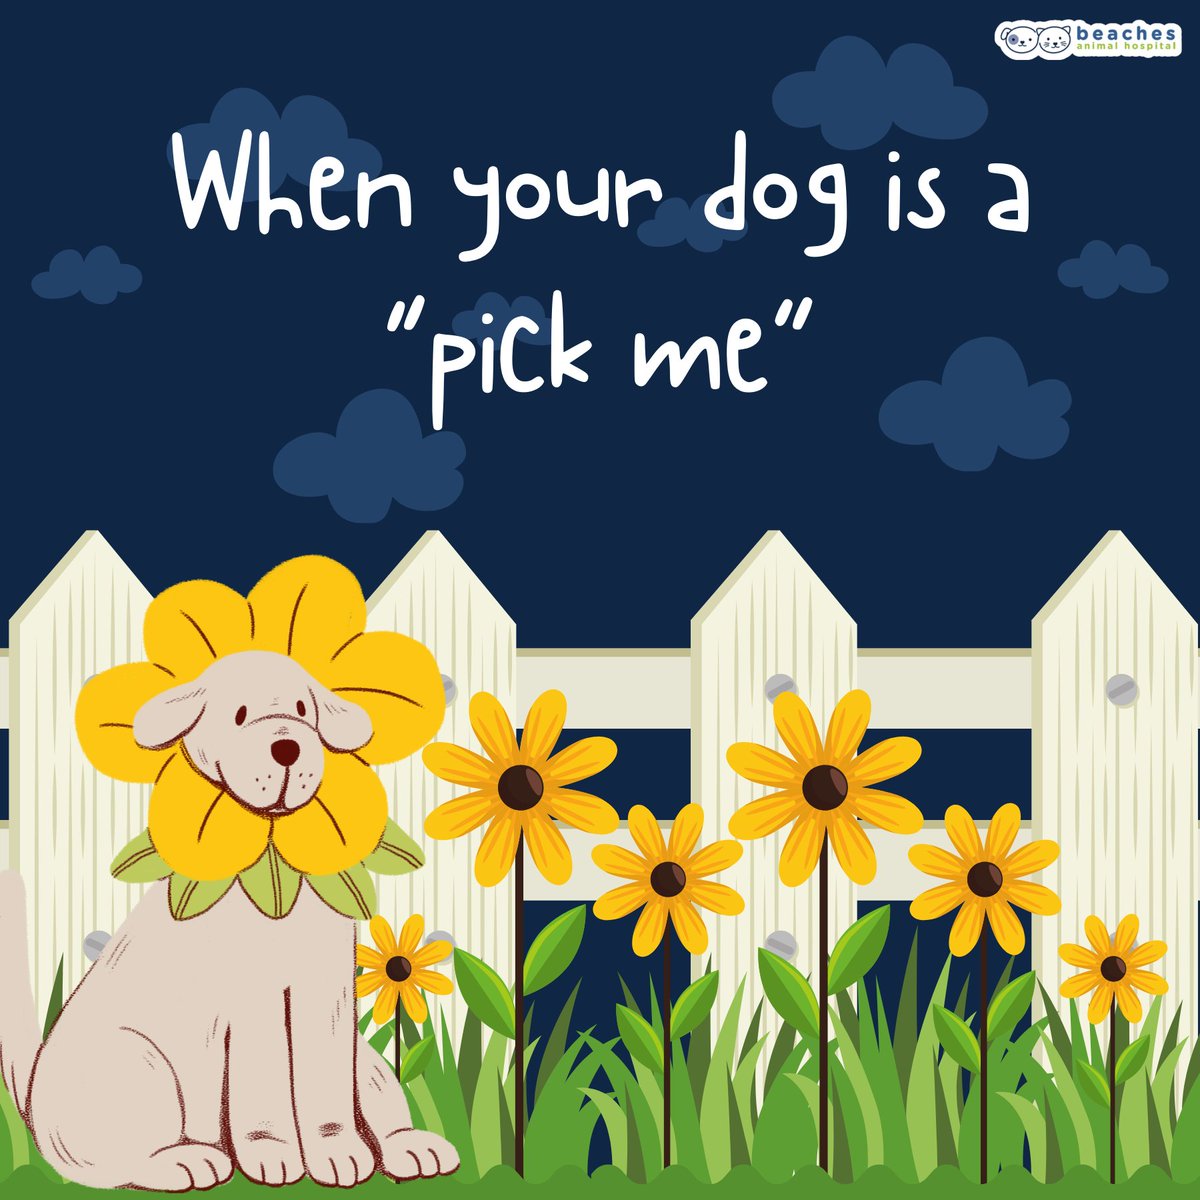 How far will your dog go to get your attention? Tell us in the comments! 🐶🌻 #PickMeDog #DogMemes

#love #instagood #cute #pet #petstagram #photooftheday #instamood #adorable #instapet